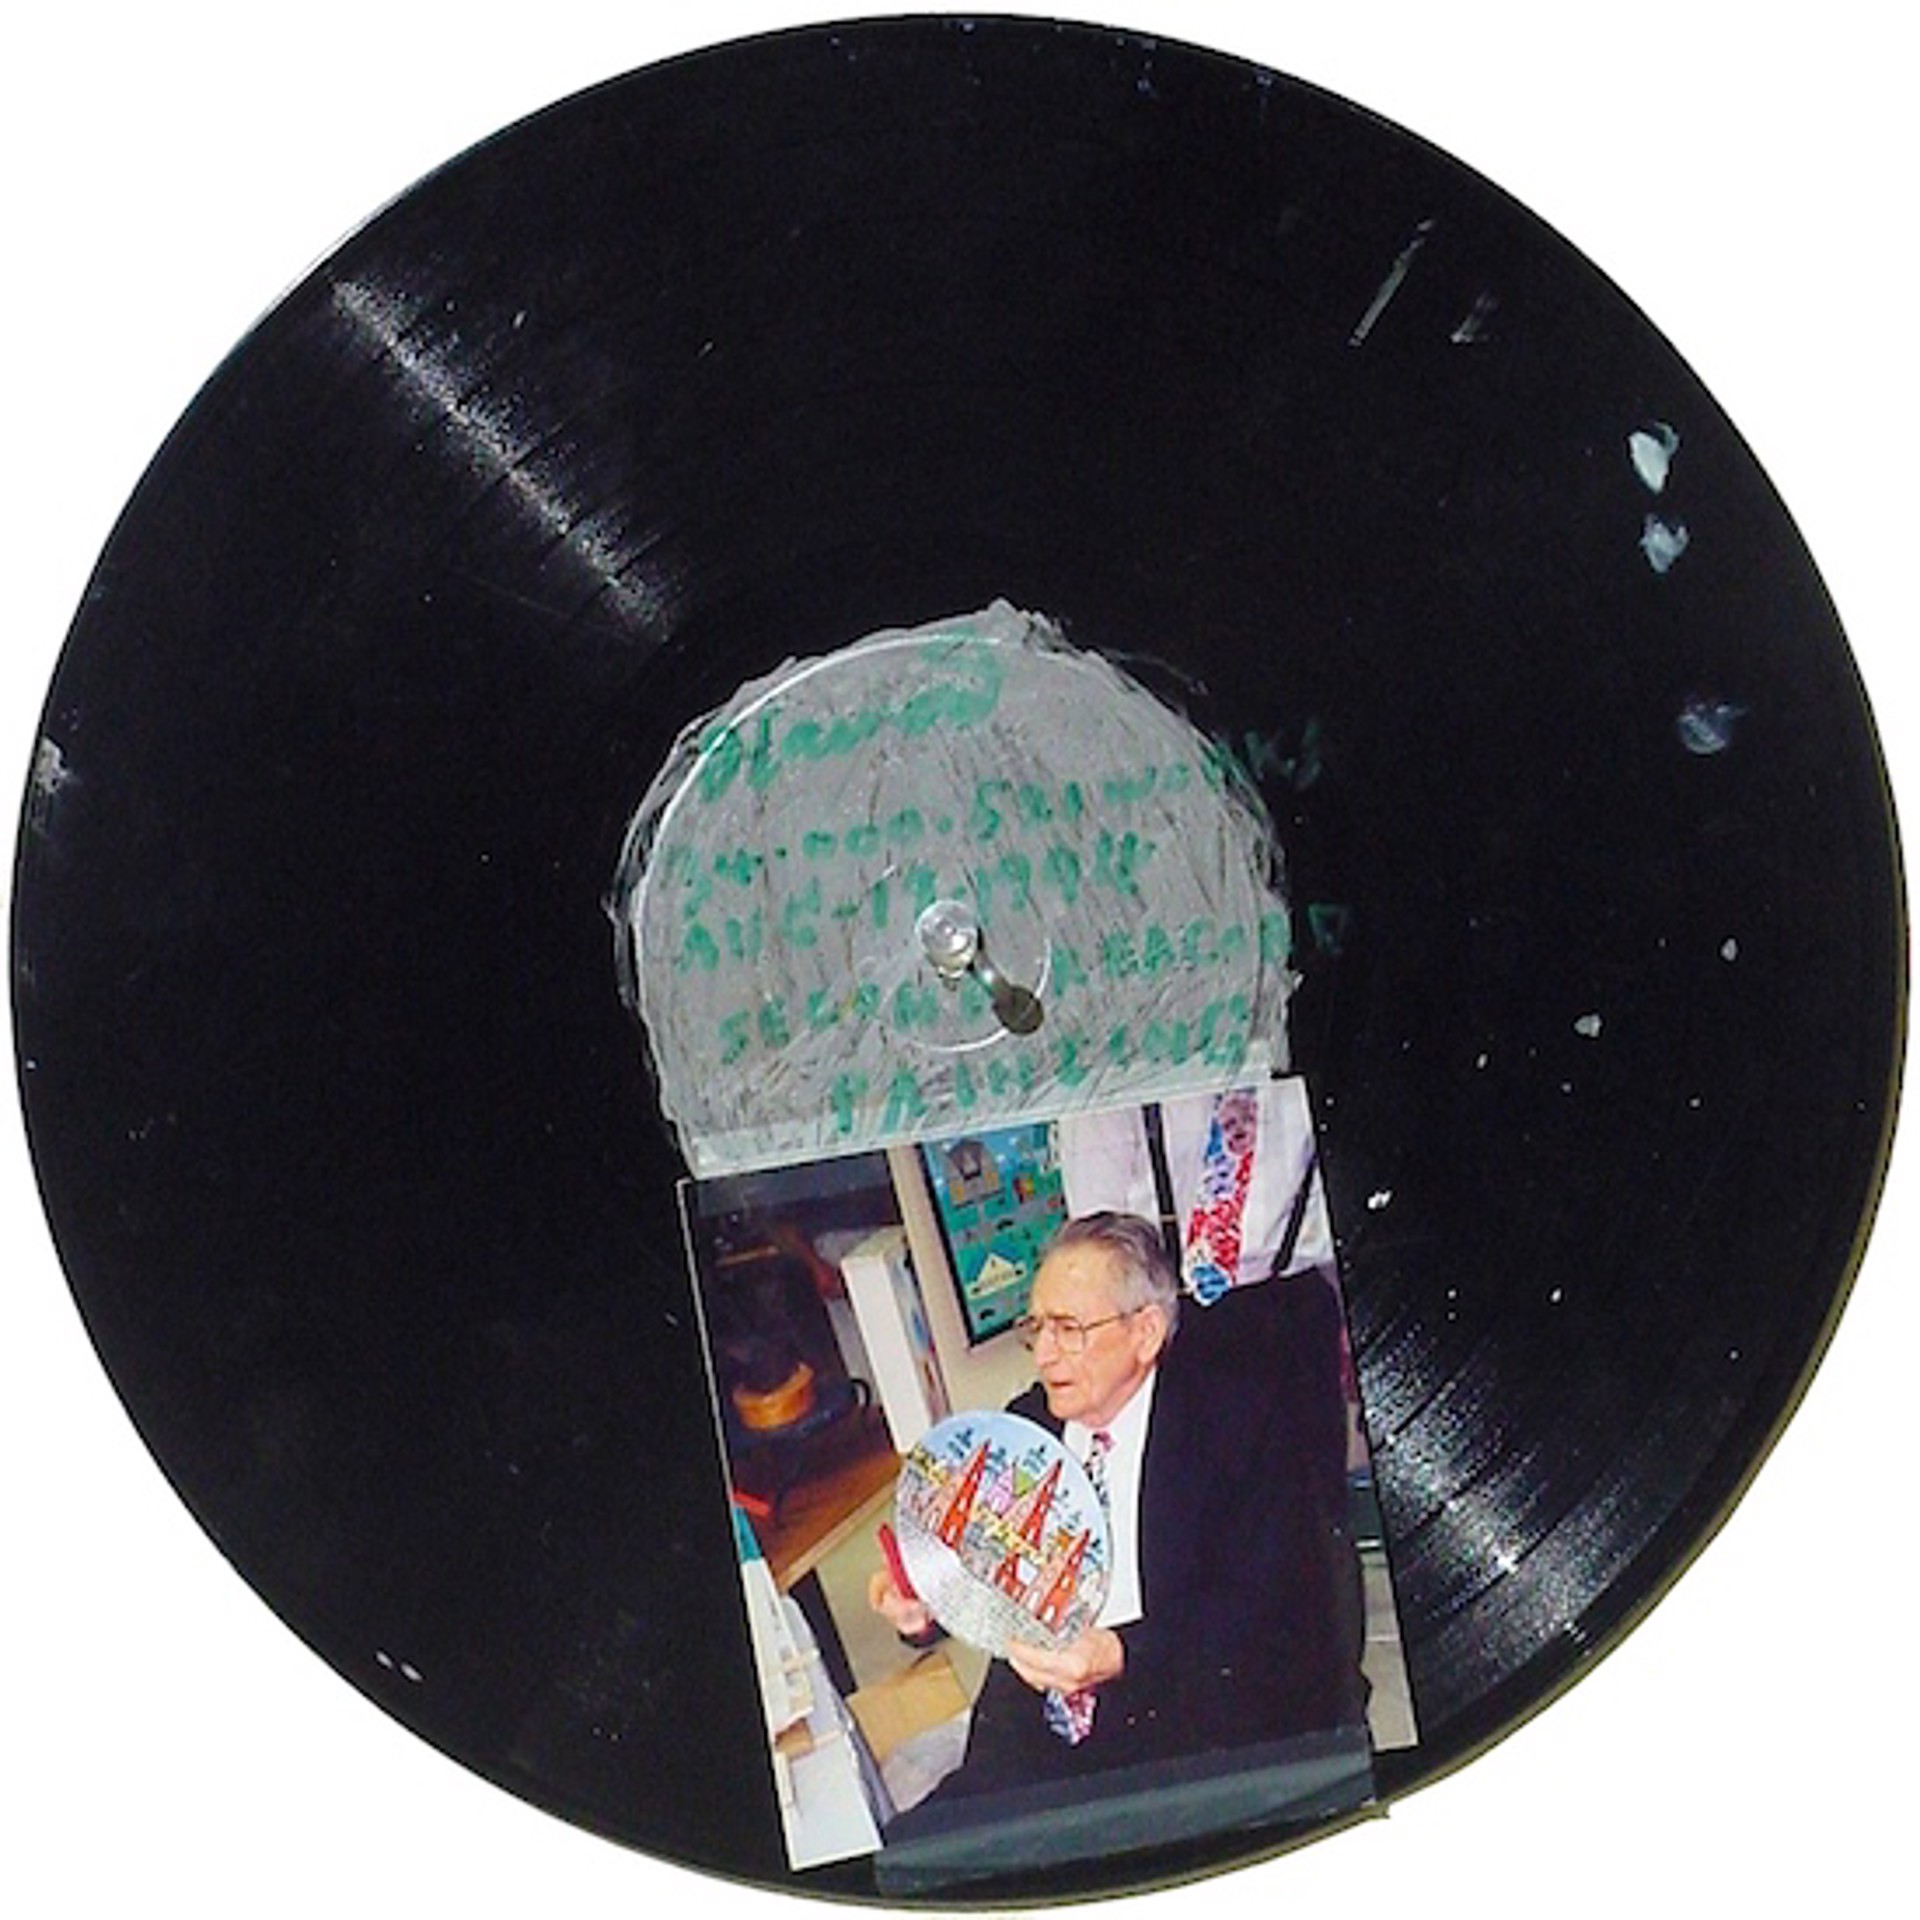 Second Record Painting by Howard Finster